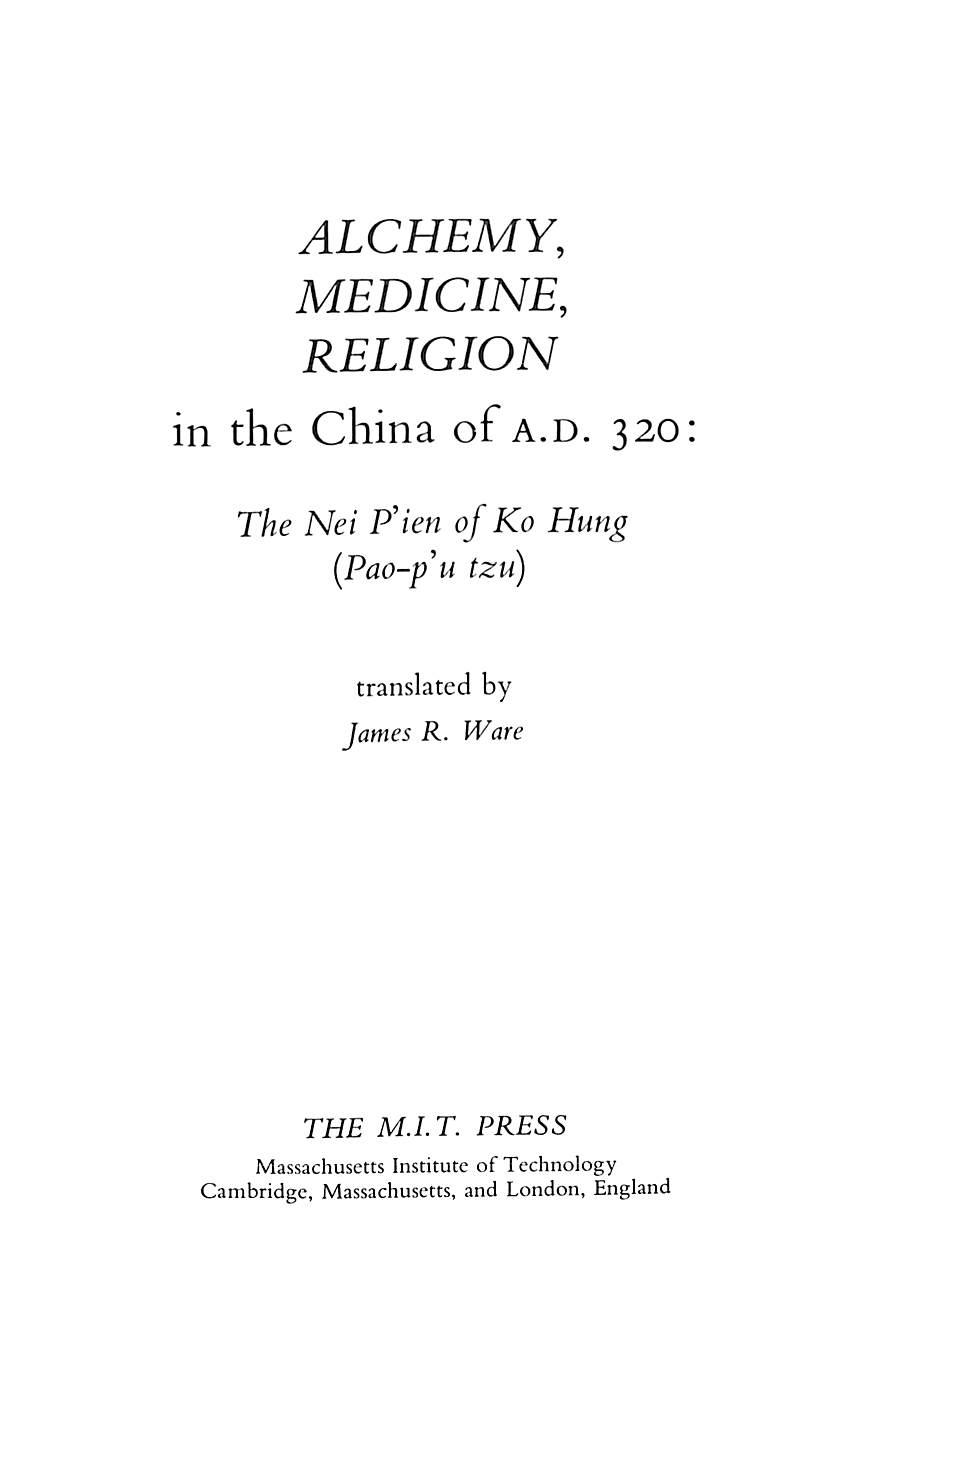 Alchemy, Medicine and Religion in the China o A.D. 320